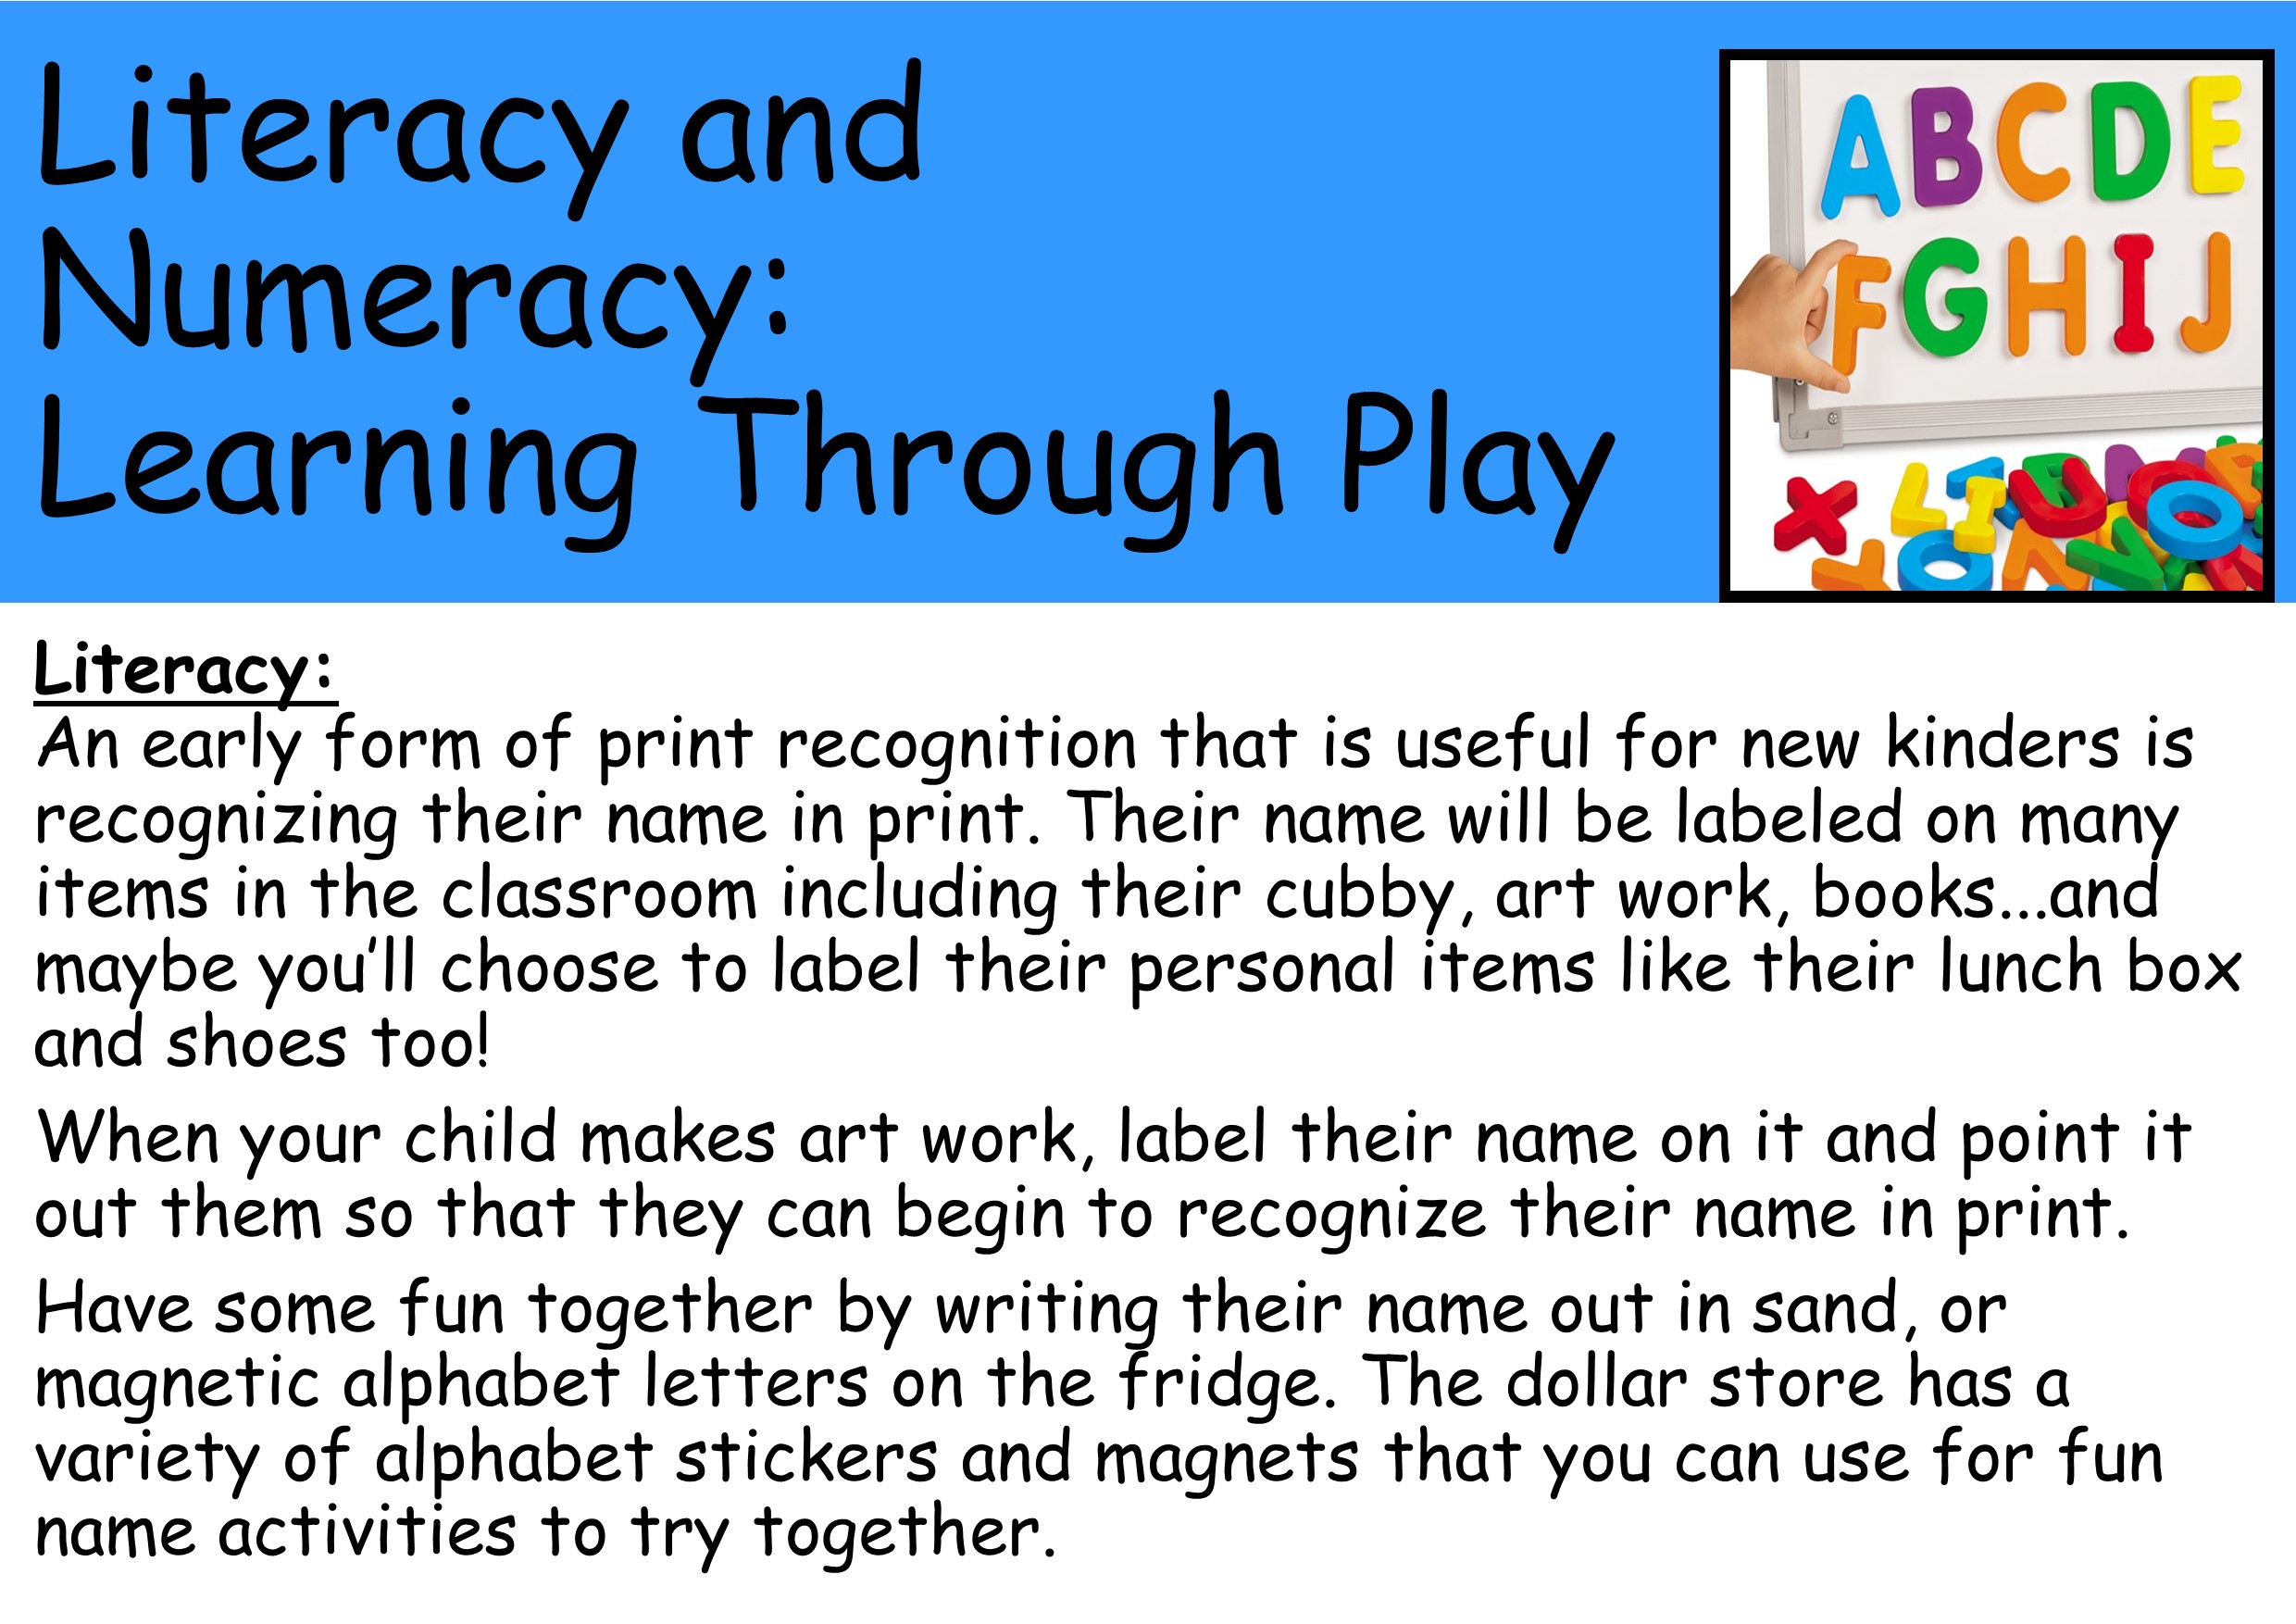 Literacy and numeracy: learning through play 